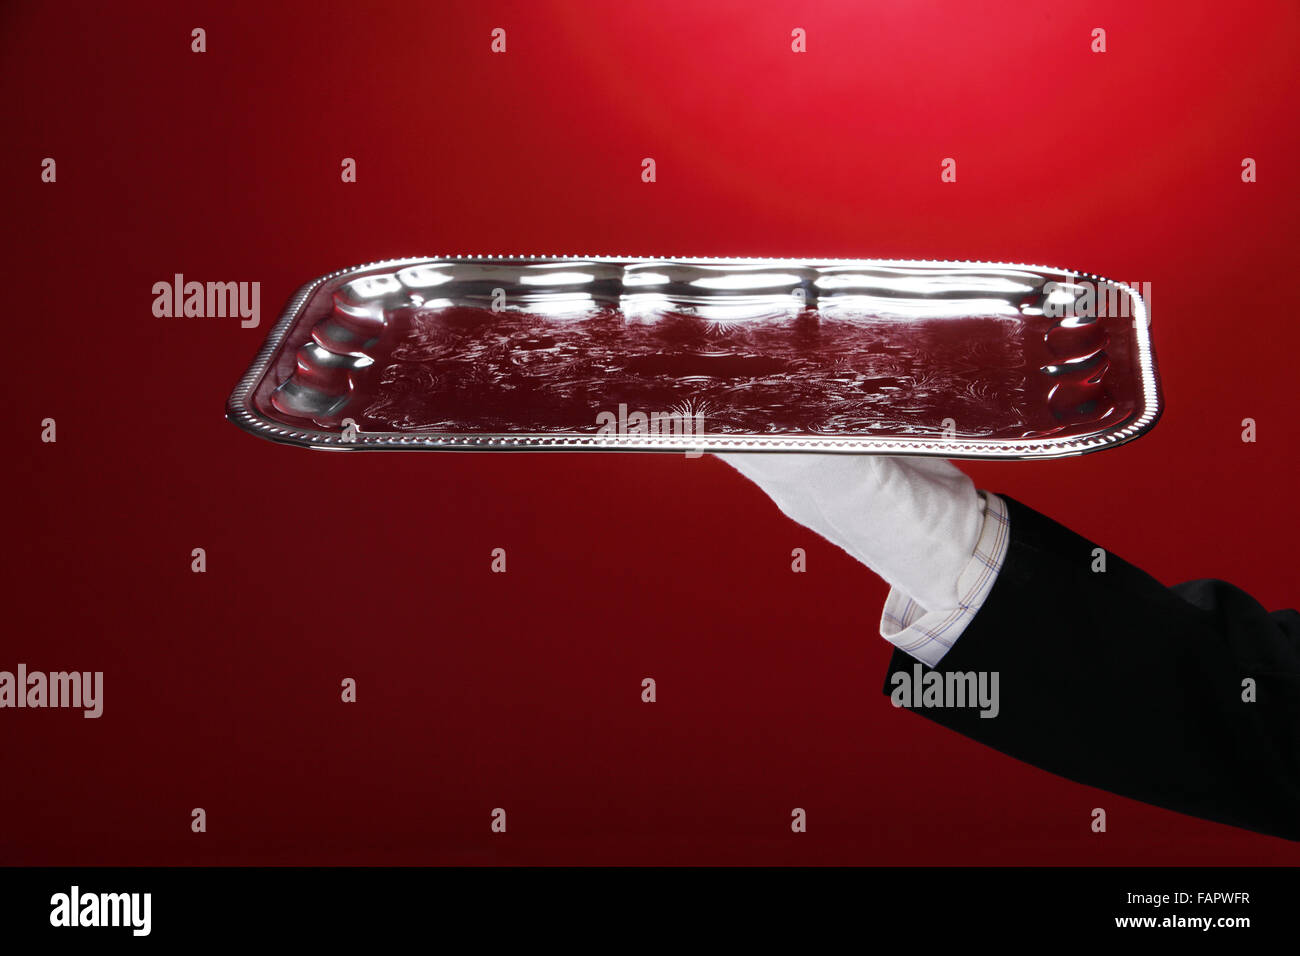 Butler carrying silver serving tray, close-up of hand Stock Photo